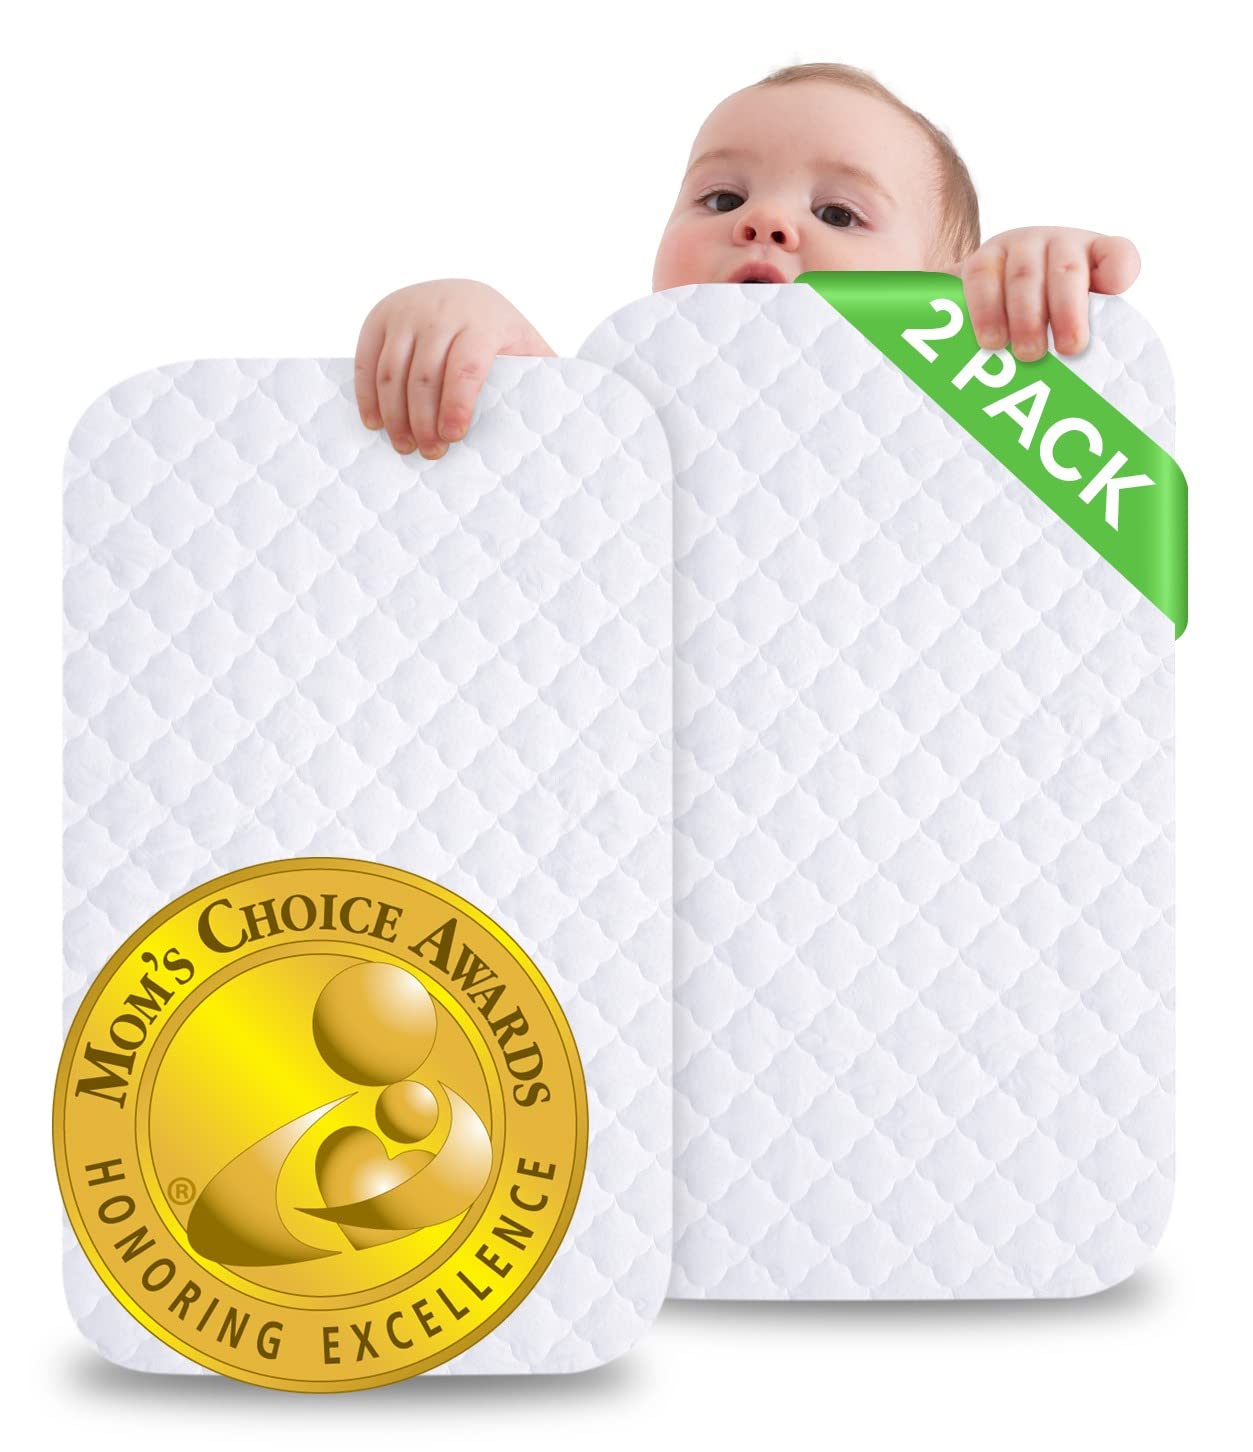 potty training baby pad Baby crib mattress pad protector fitted waterproof cover soft quilted